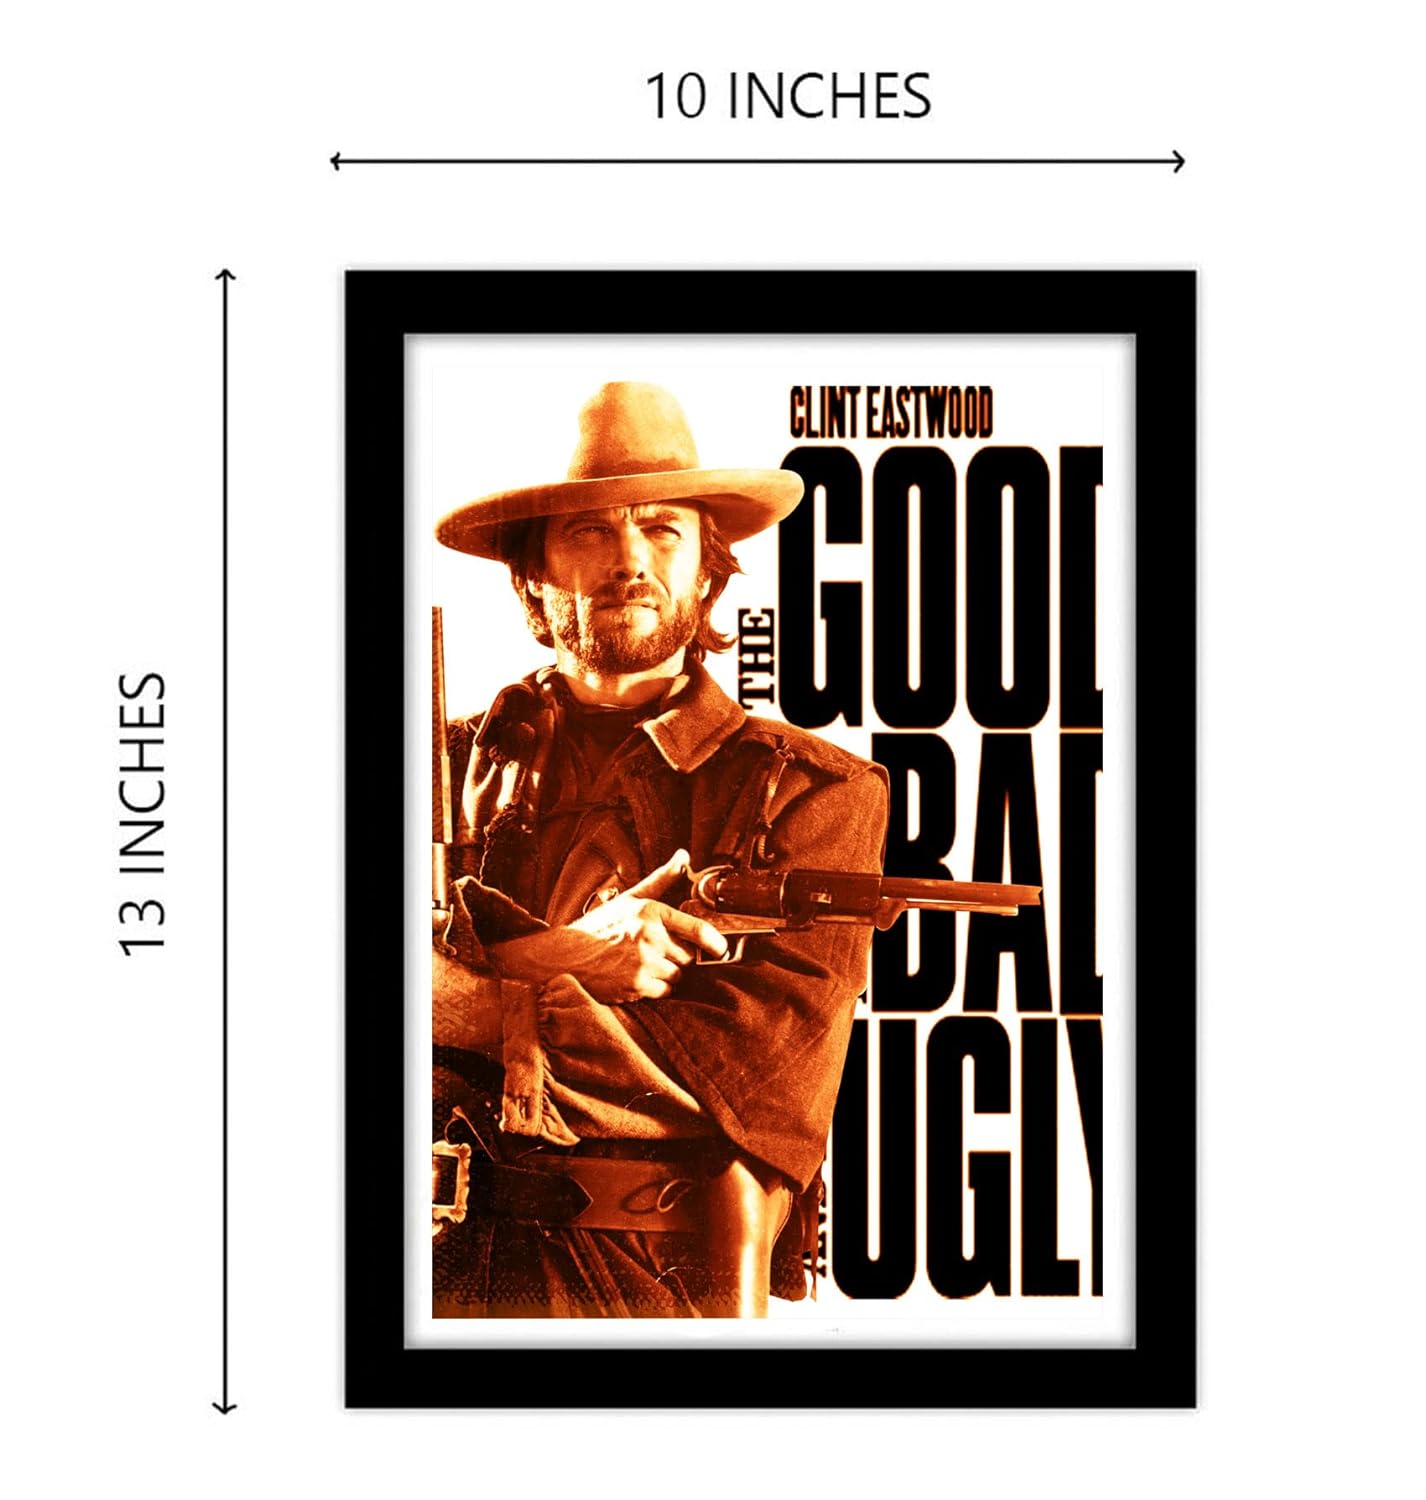 The Good, the Bad and the Ugly Movie Art work